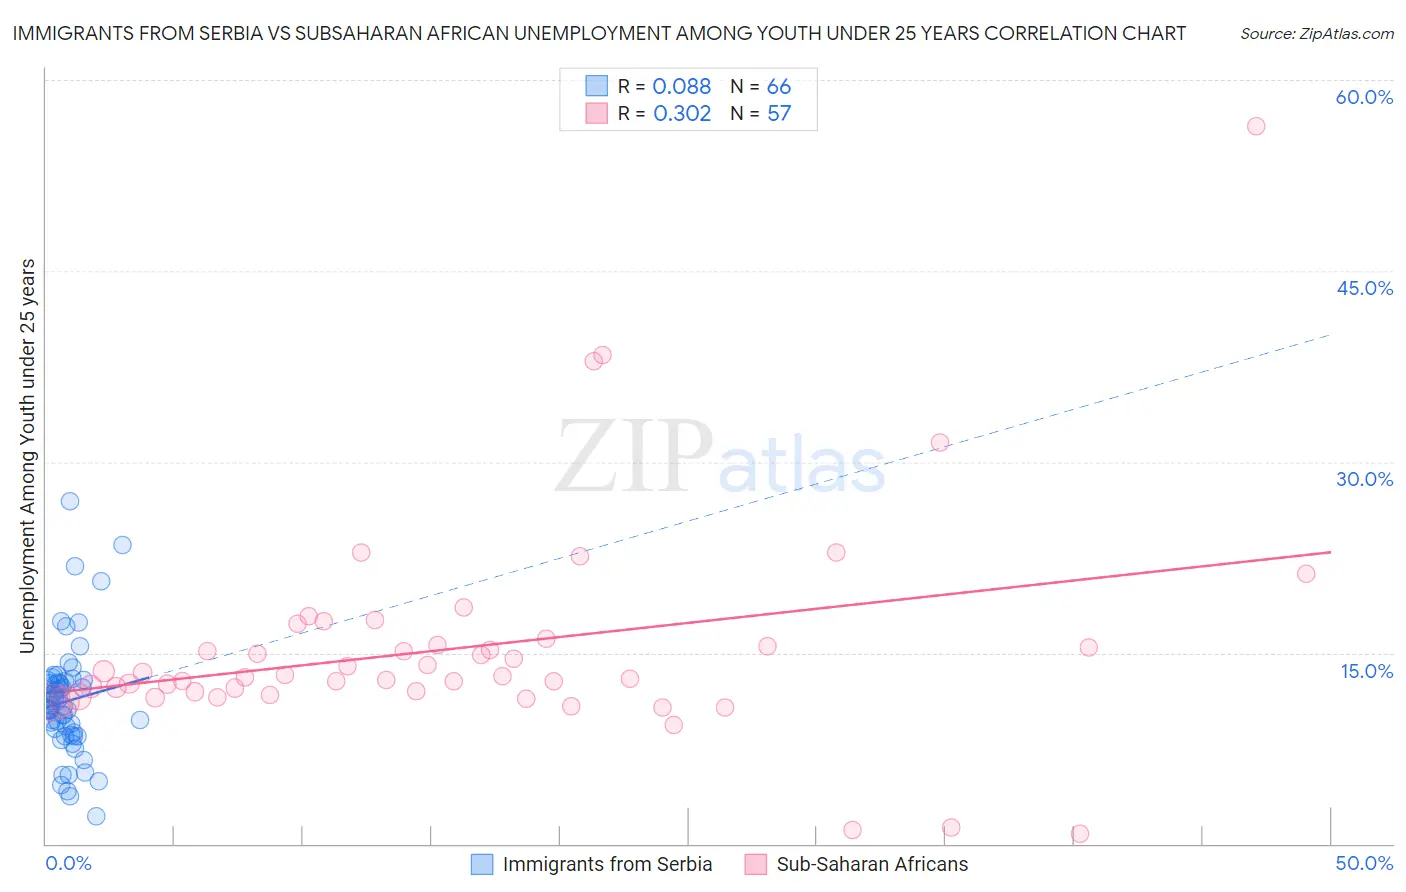 Immigrants from Serbia vs Subsaharan African Unemployment Among Youth under 25 years